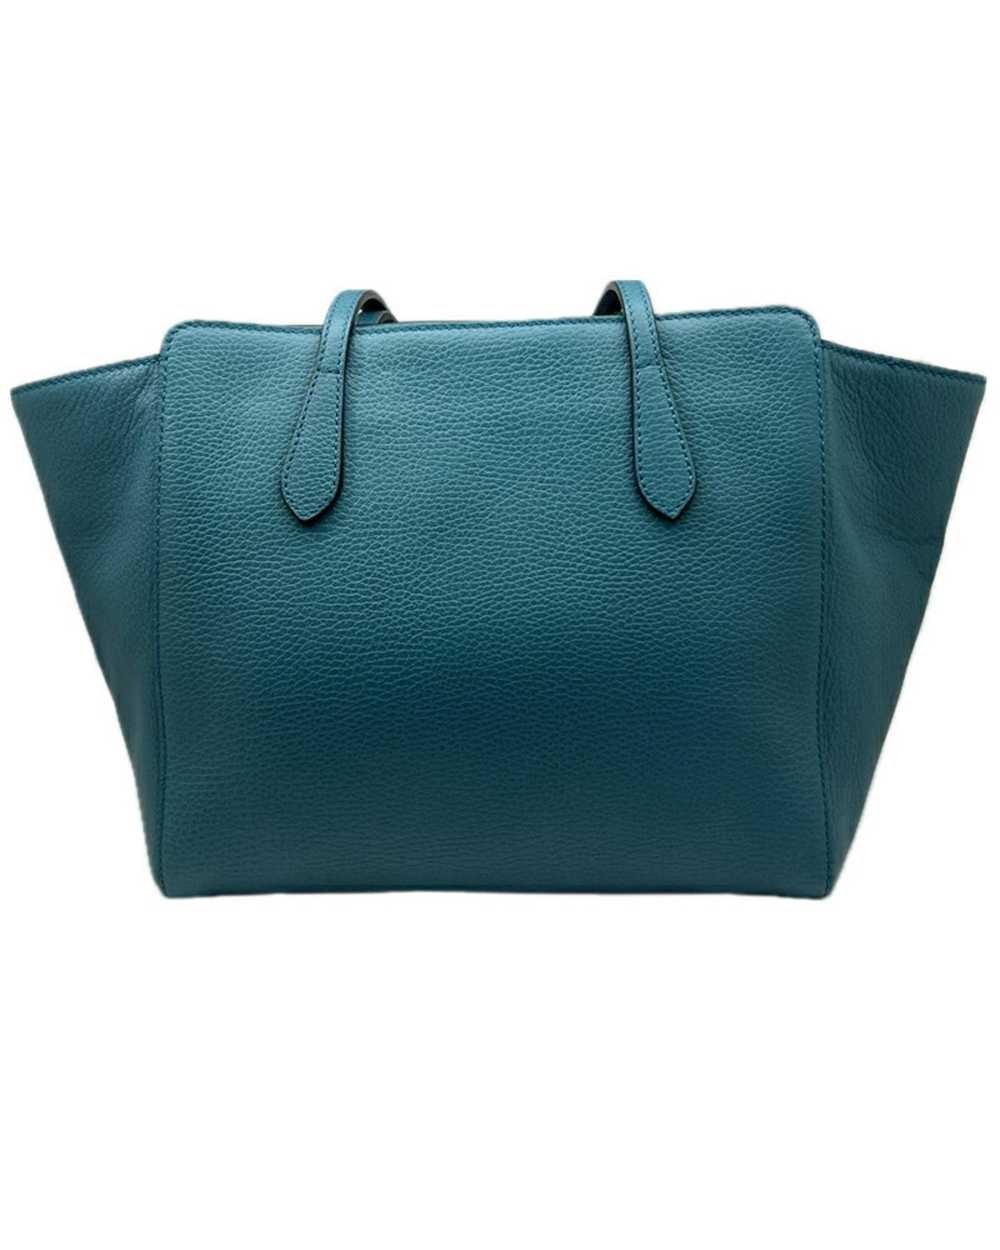 Gucci Blue Leather Swing Bag - image 2